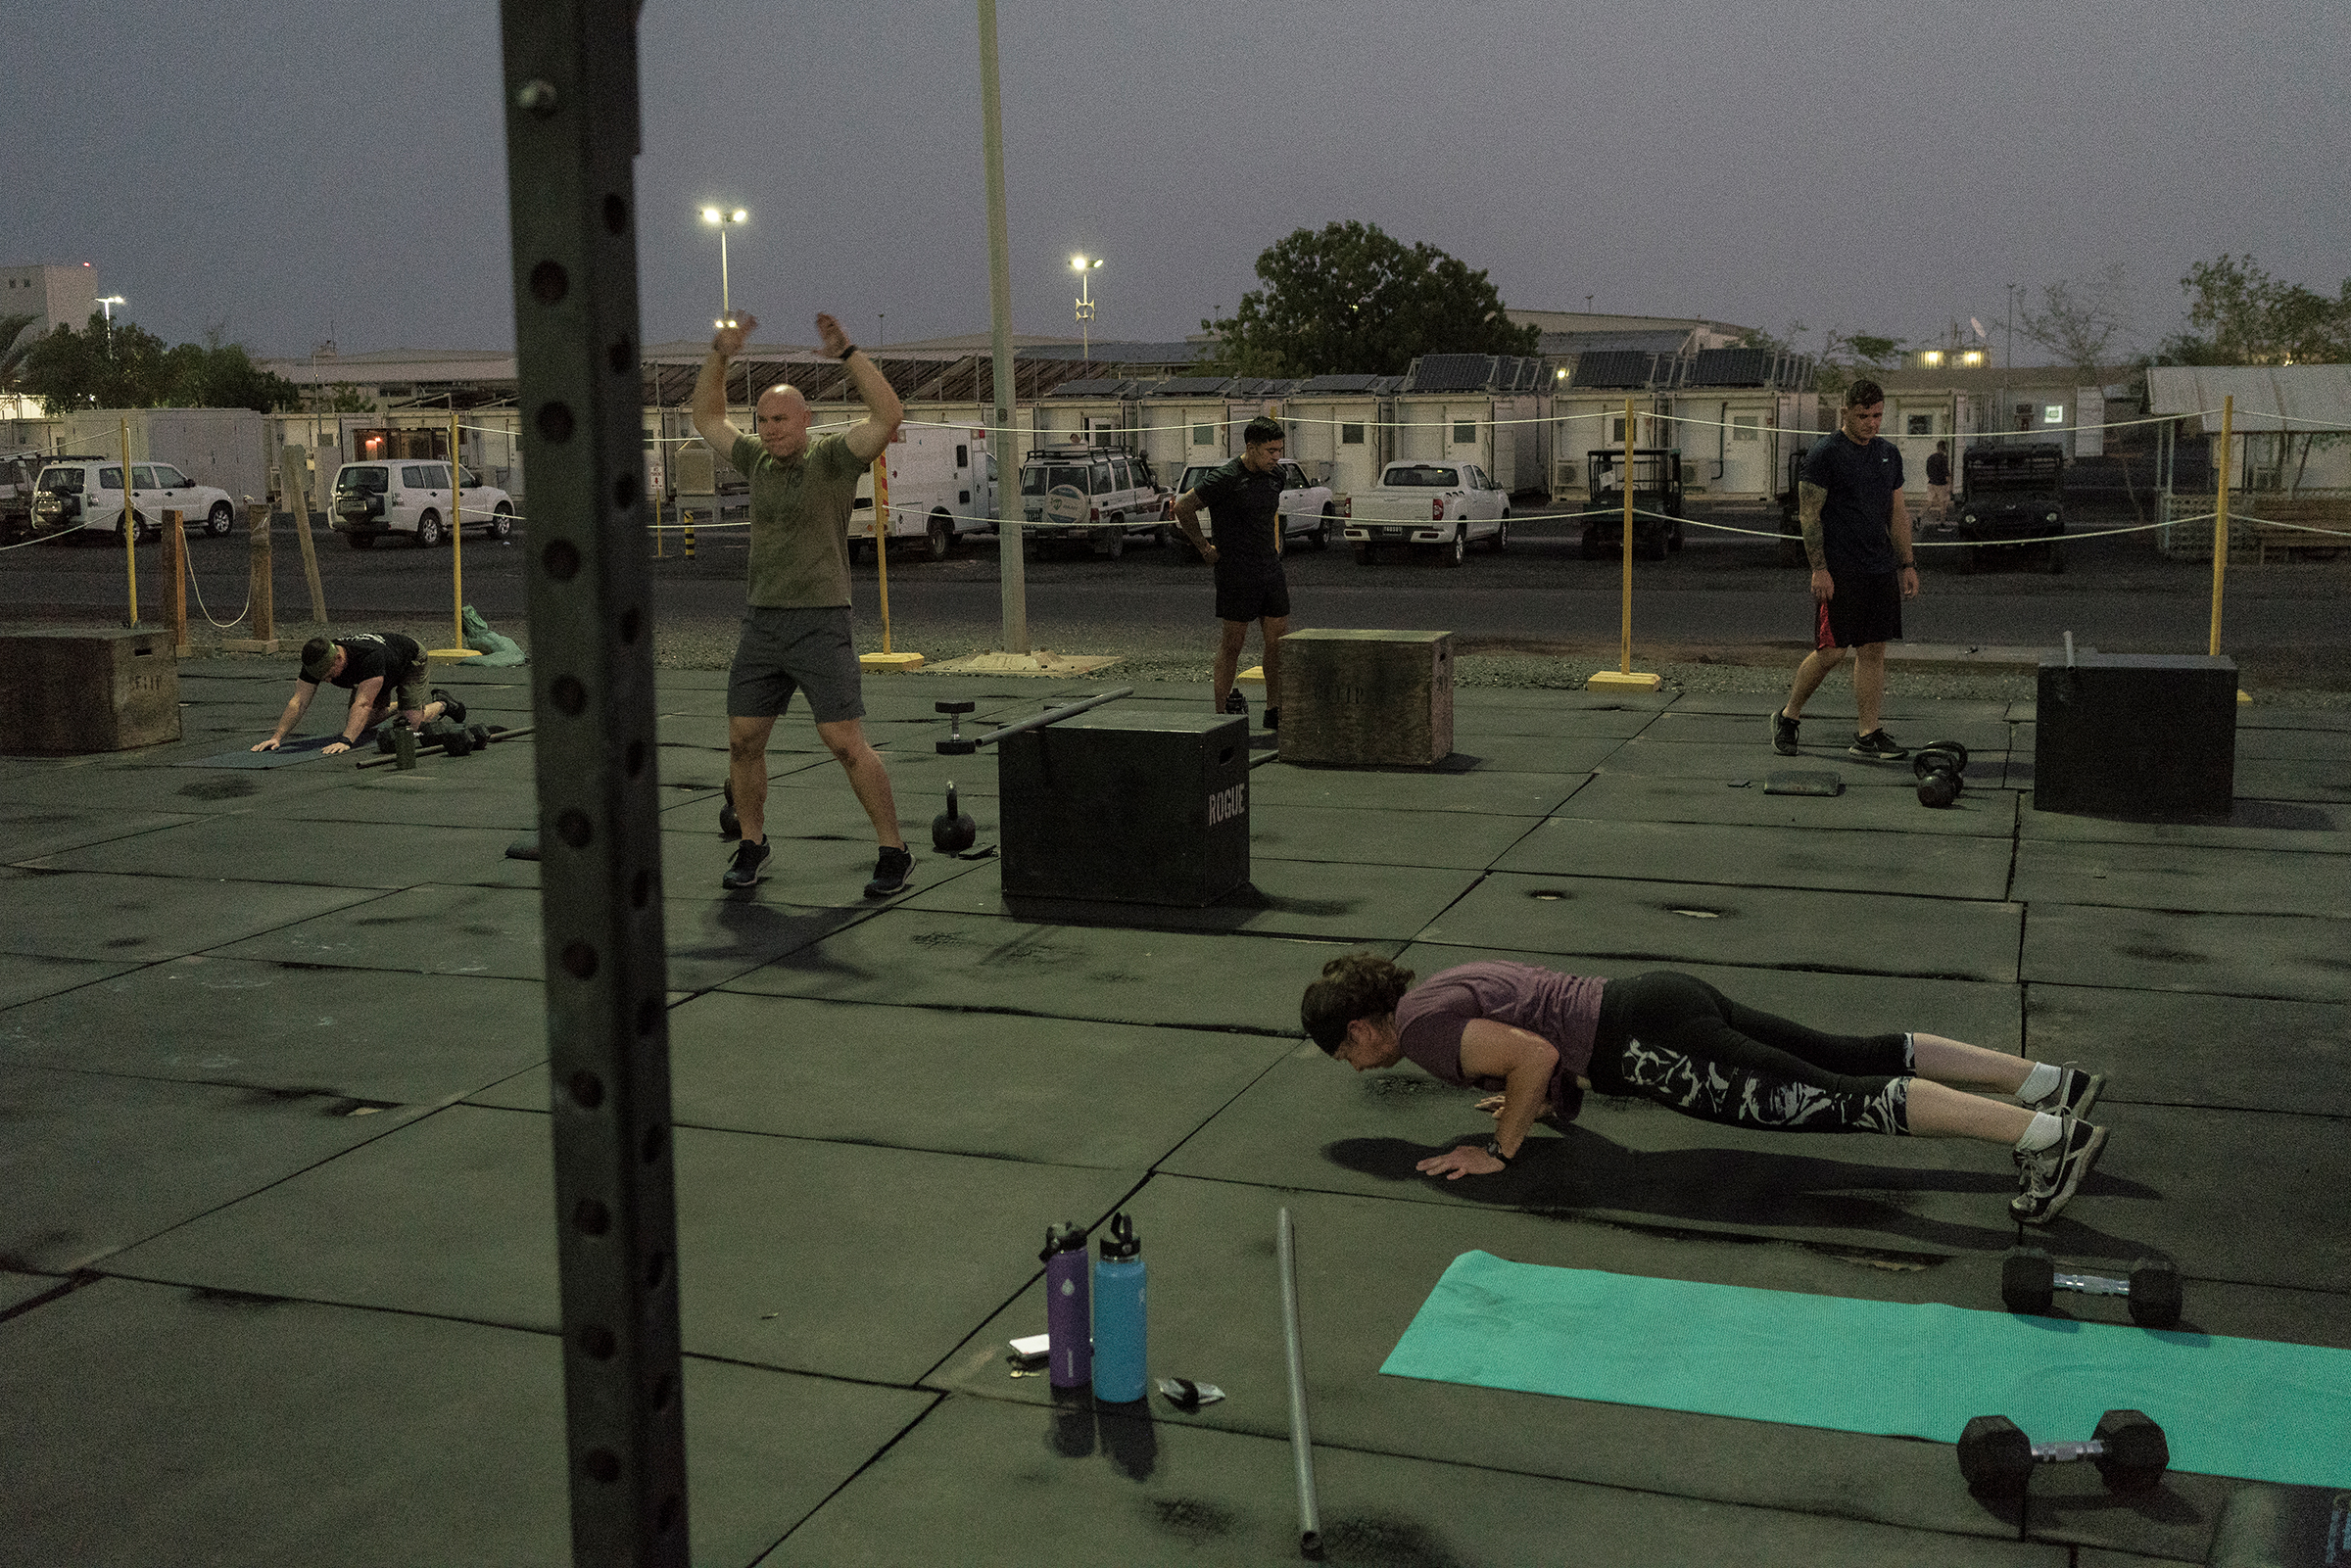 A morning exercise session at the base.